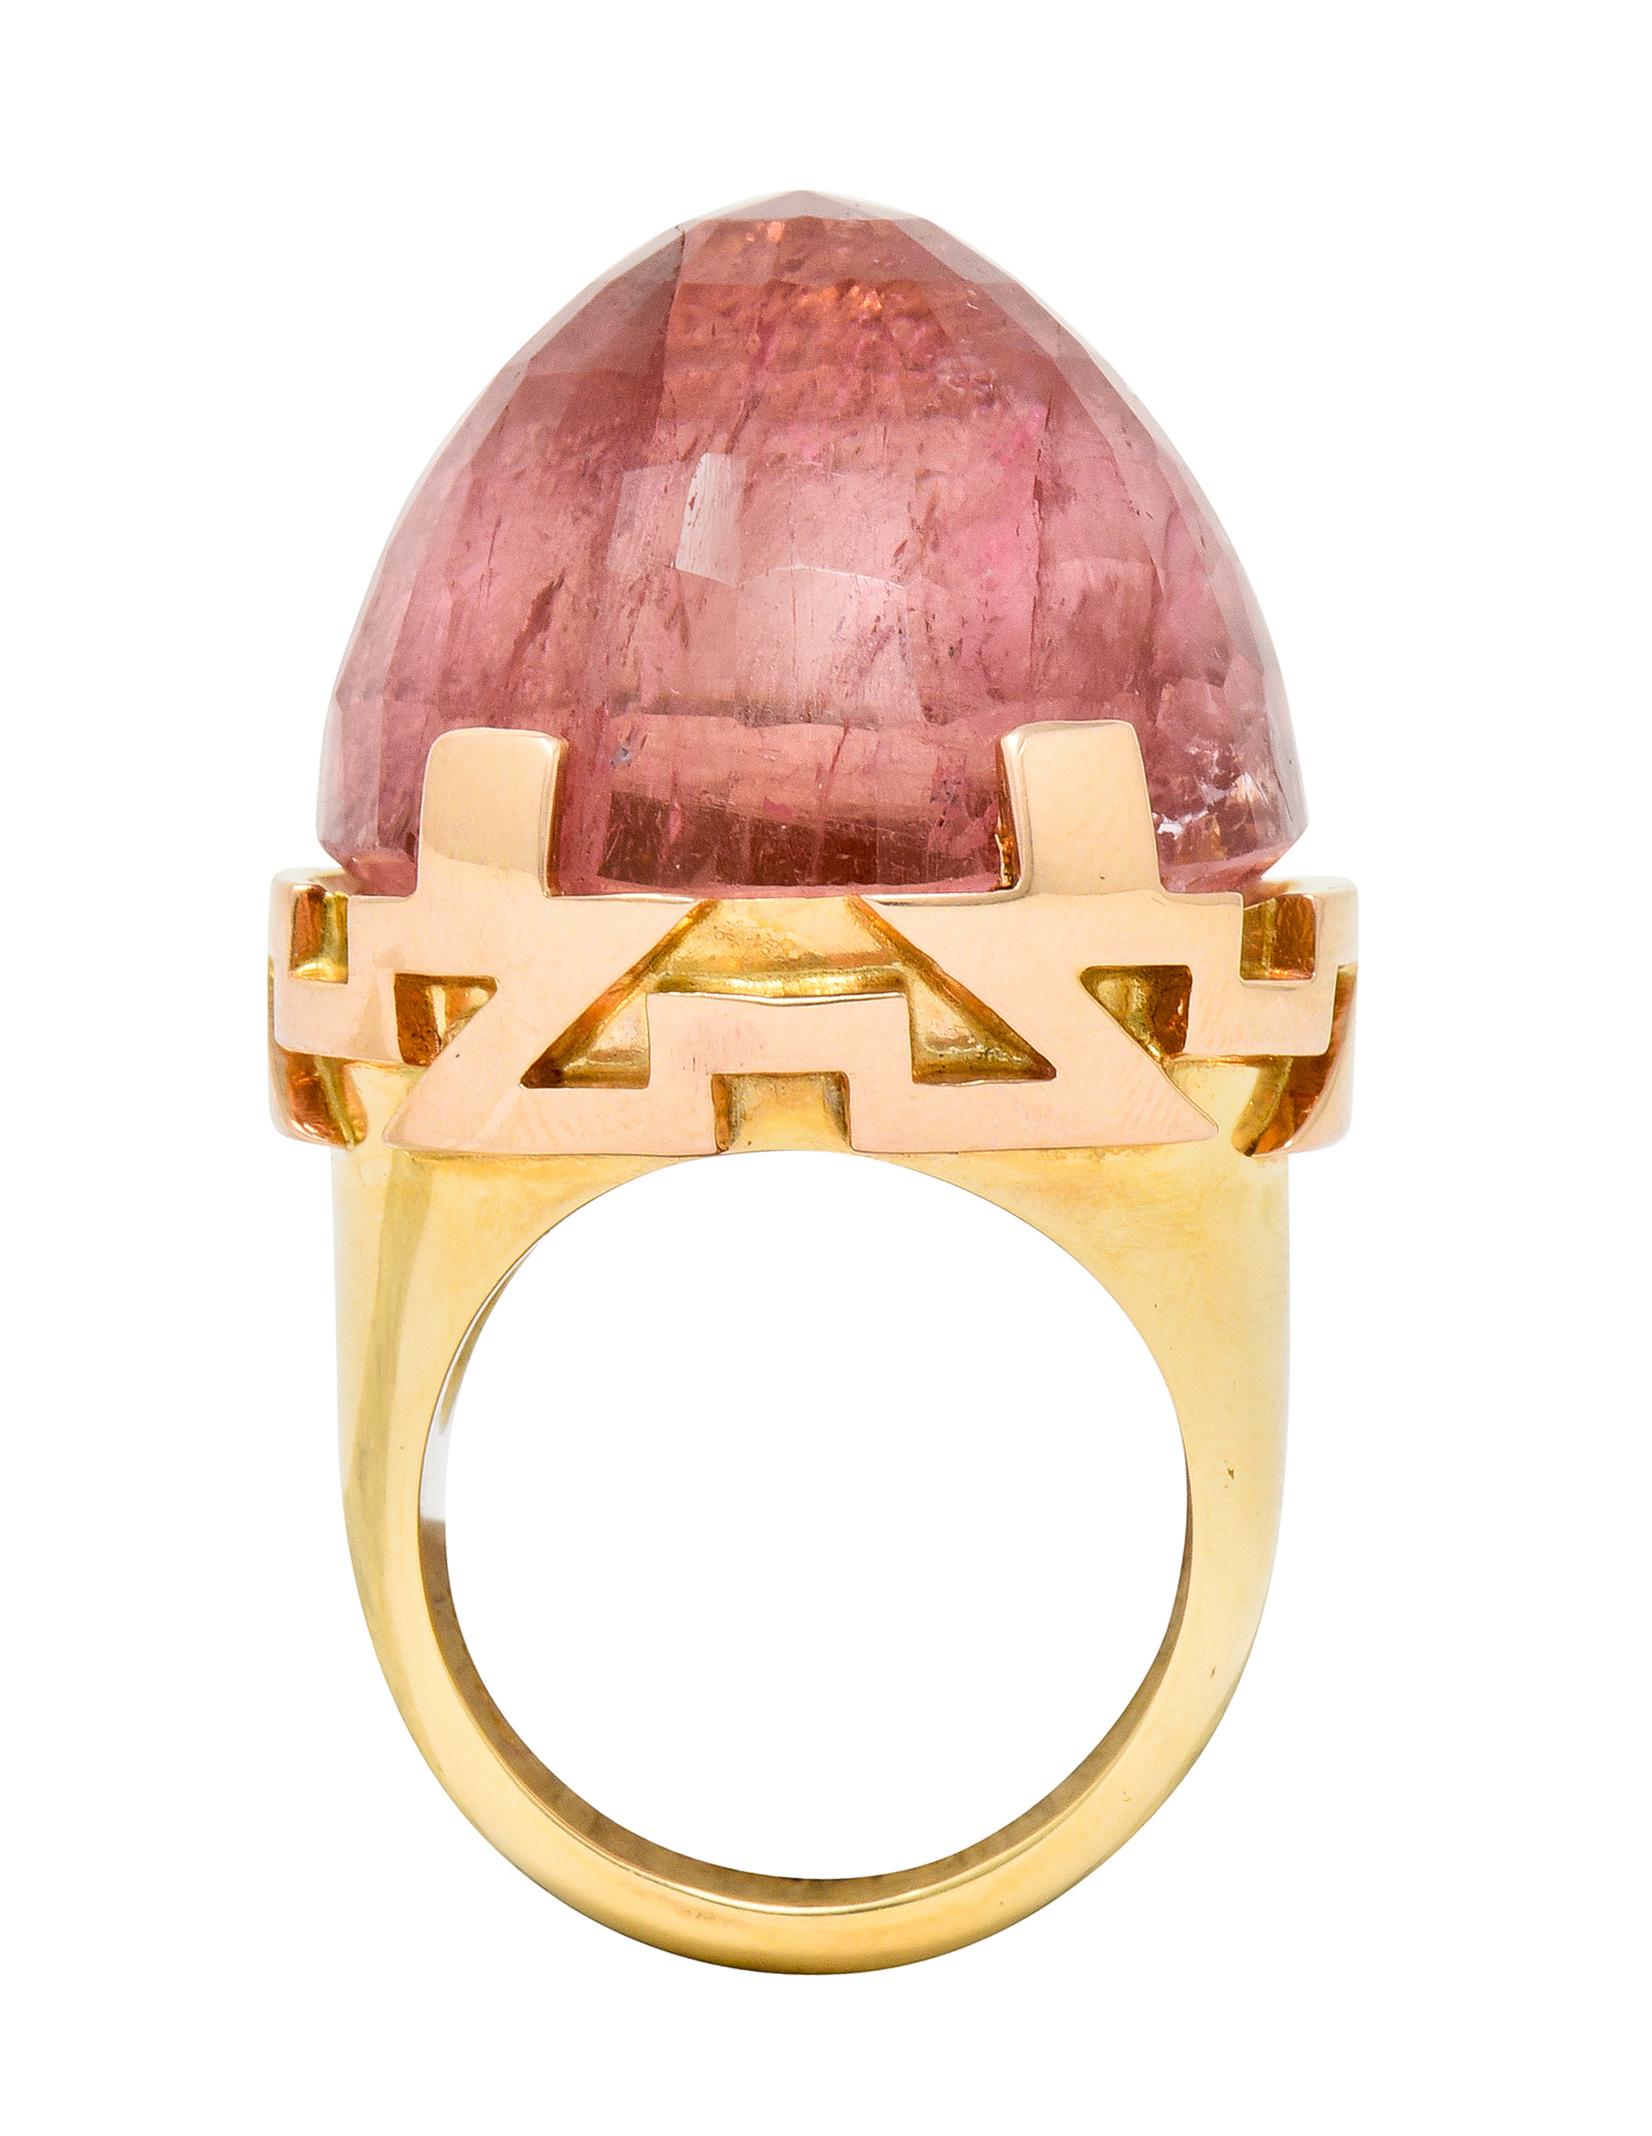 Centering a substantial checkerboard cut pink tourmaline, reverse set as a high dome, measuring approximately 25.9 x 24.0 mm

A very saturated bubble gum pink color and translucent with natural inclusions

Set by wide prongs and features a stylized